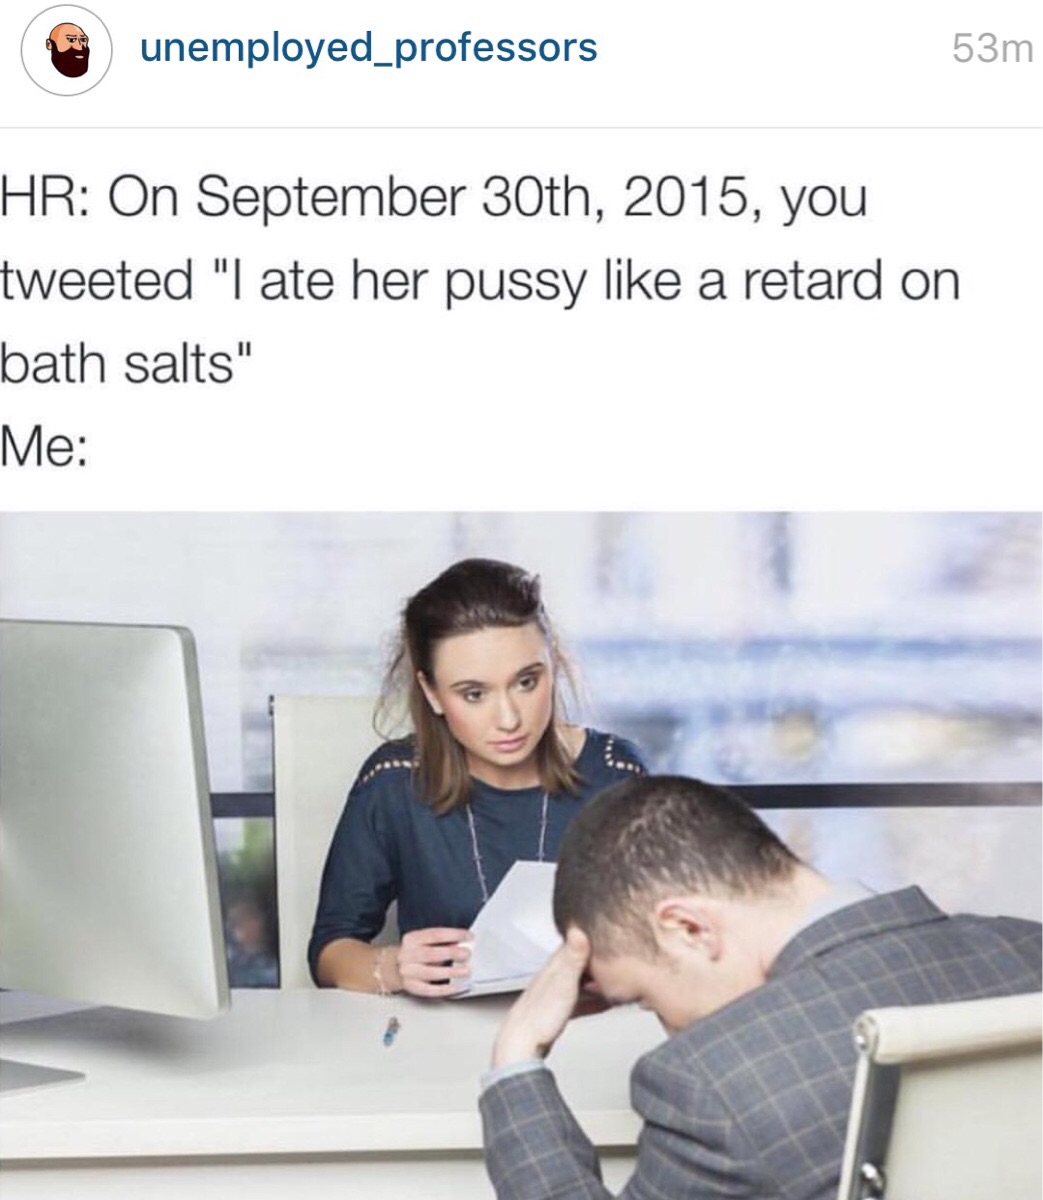 memes - ate her pussy like a retard on bath salts - unemployed_professors 53m Hr On September 30th, 2015, you tweeted "I ate her pussy a retard on bath salts" Me